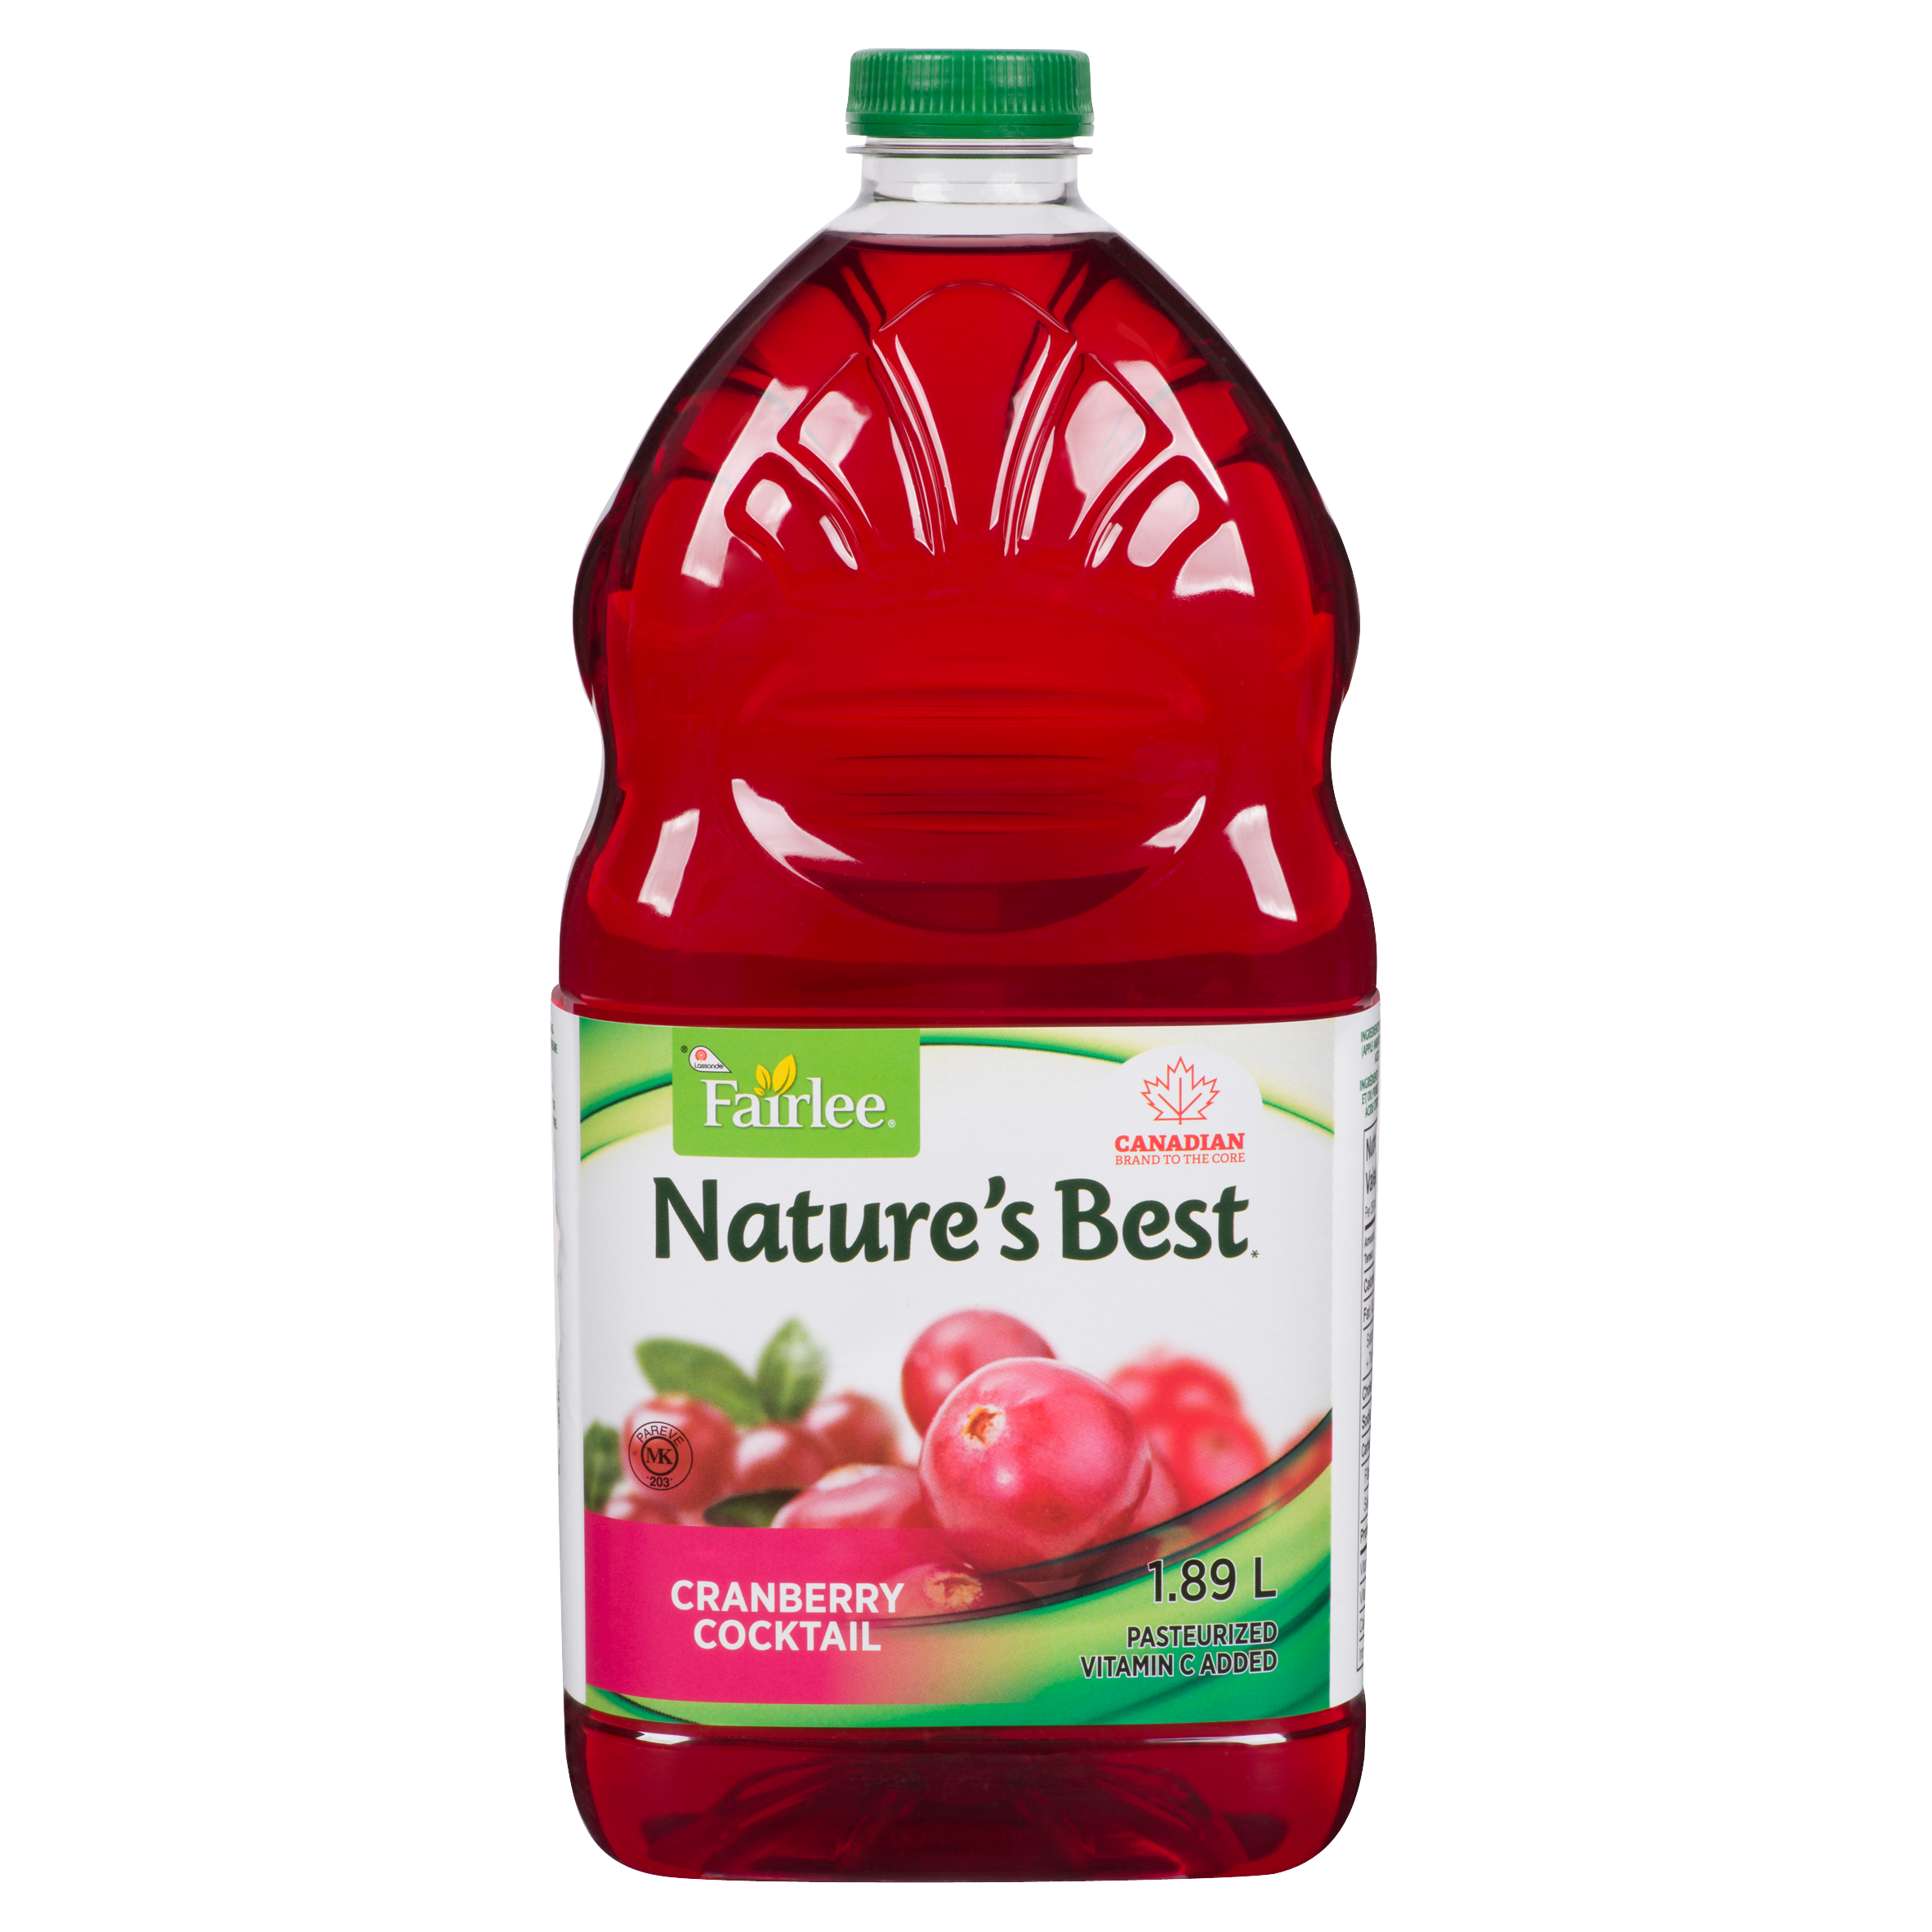 Fairlee Nature's Best Cranberry Cocktail 1.89 L | Powell's 